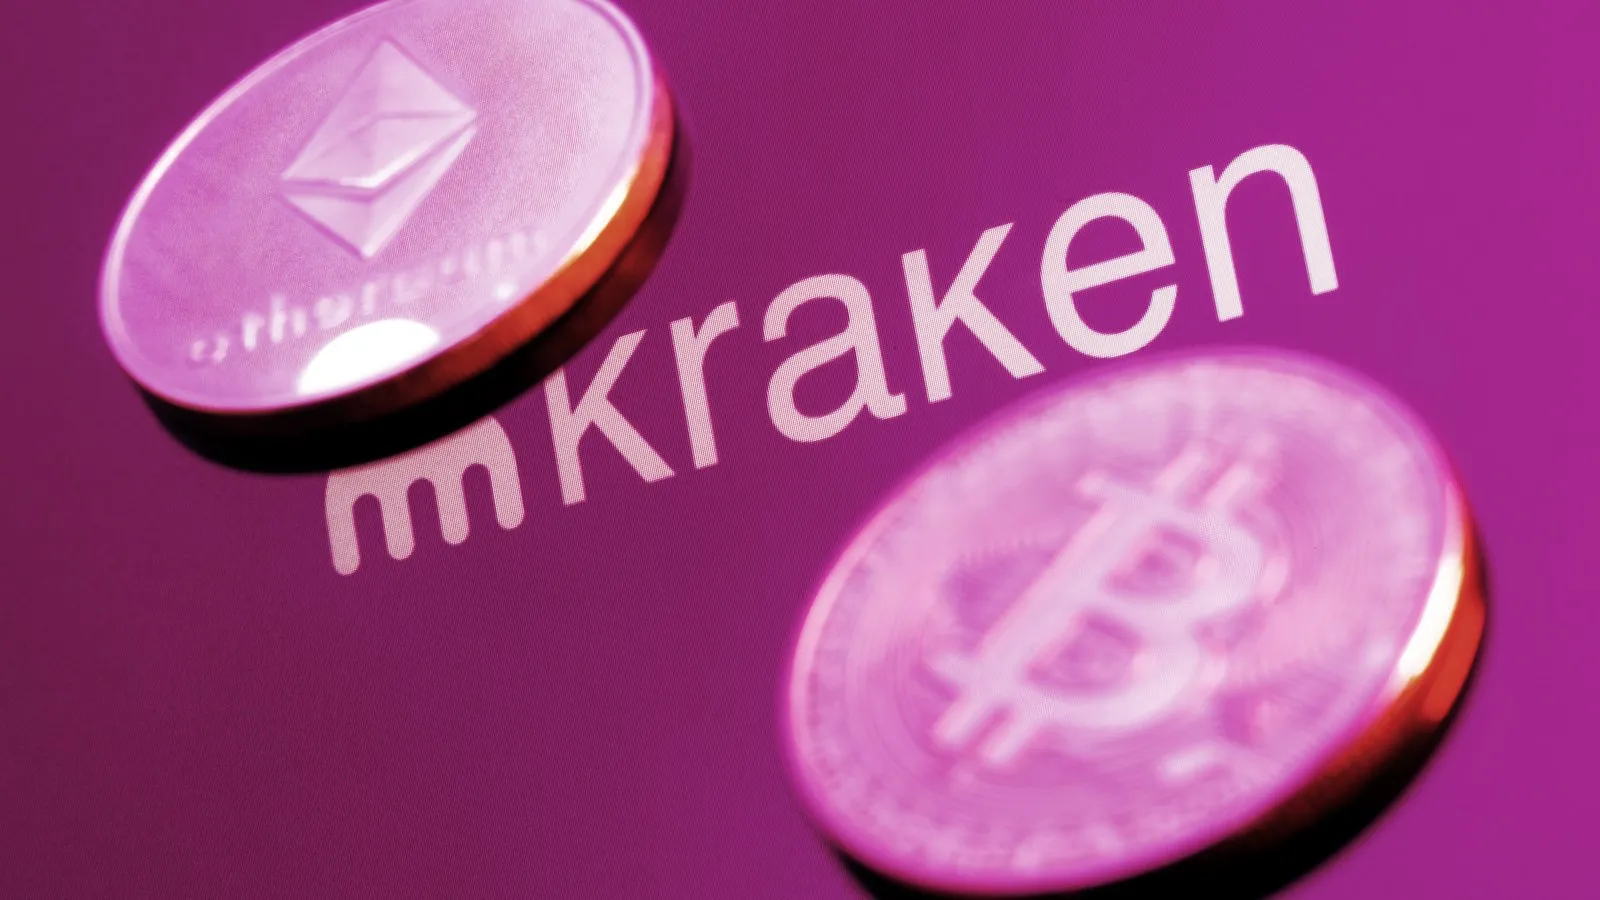 Kraken is a cryptocurrency exchange led by Jesse Powell. Image: Shutterstock